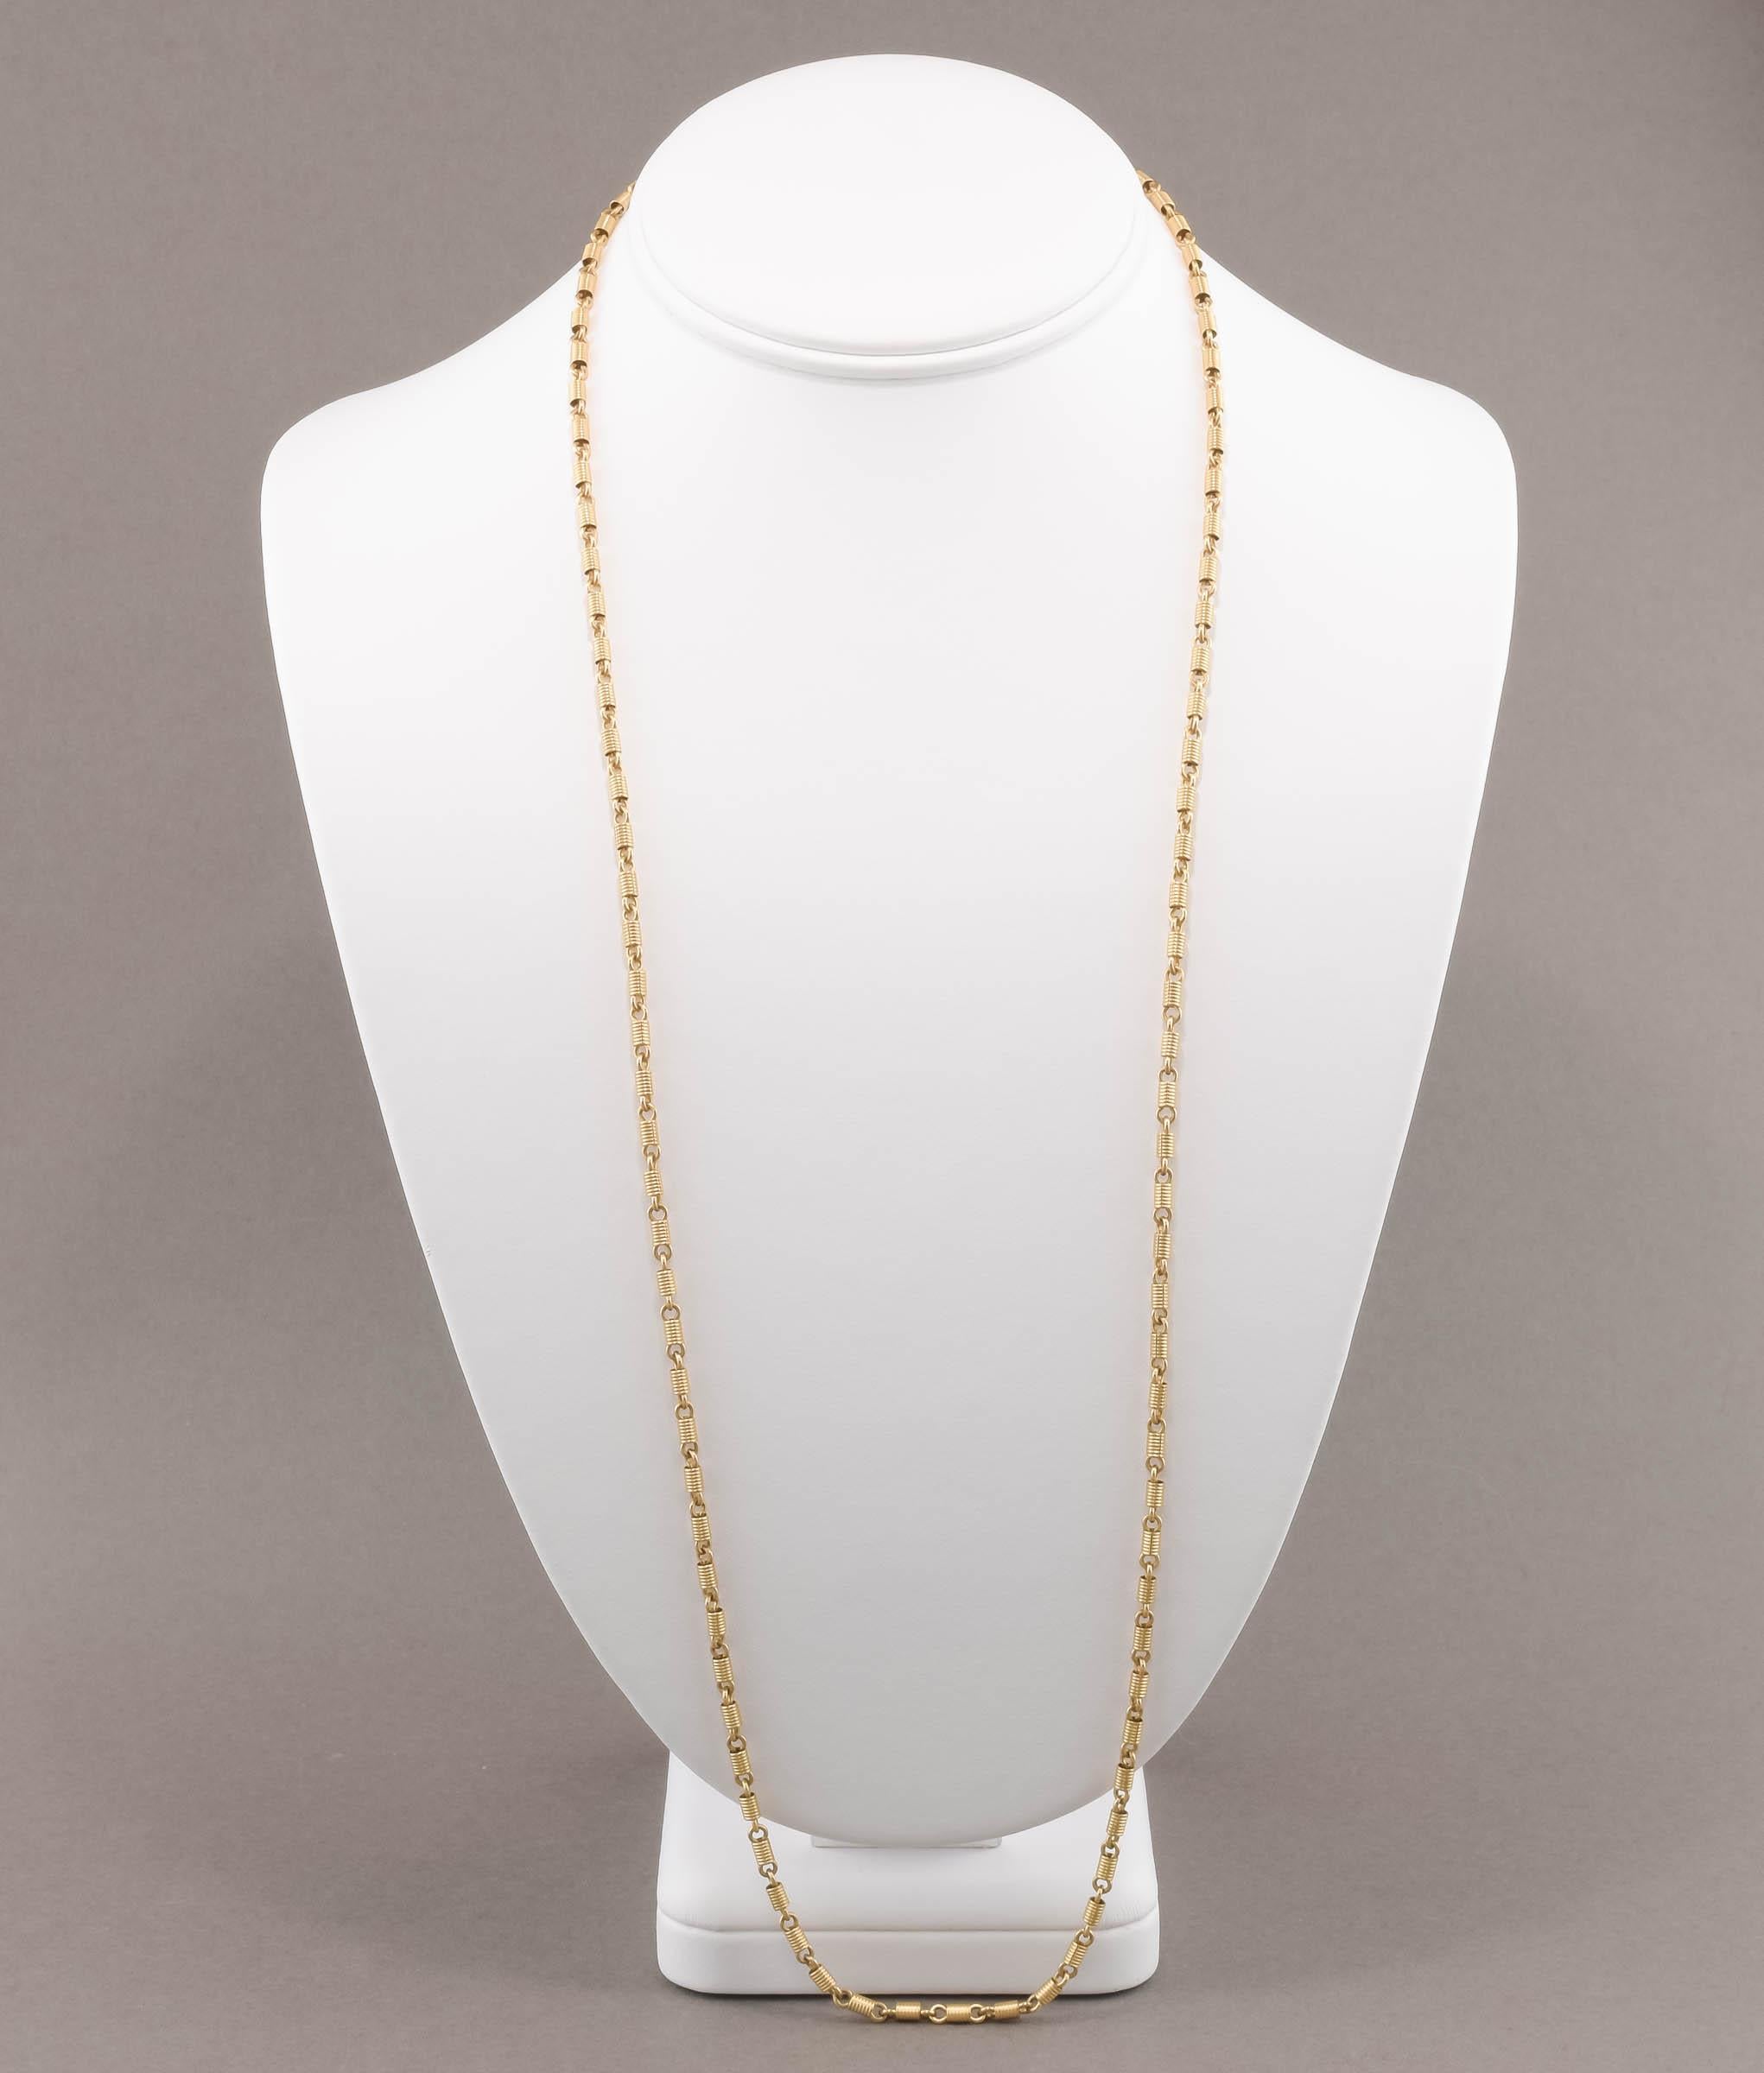 Offered is a wonderful fancy link long gold chain dating to the late 19th century - early 20th century.  

Crafted of solid 14K yellow gold, the fancy style links look like tightly coiled springs - not a very easy to find style, especially in this